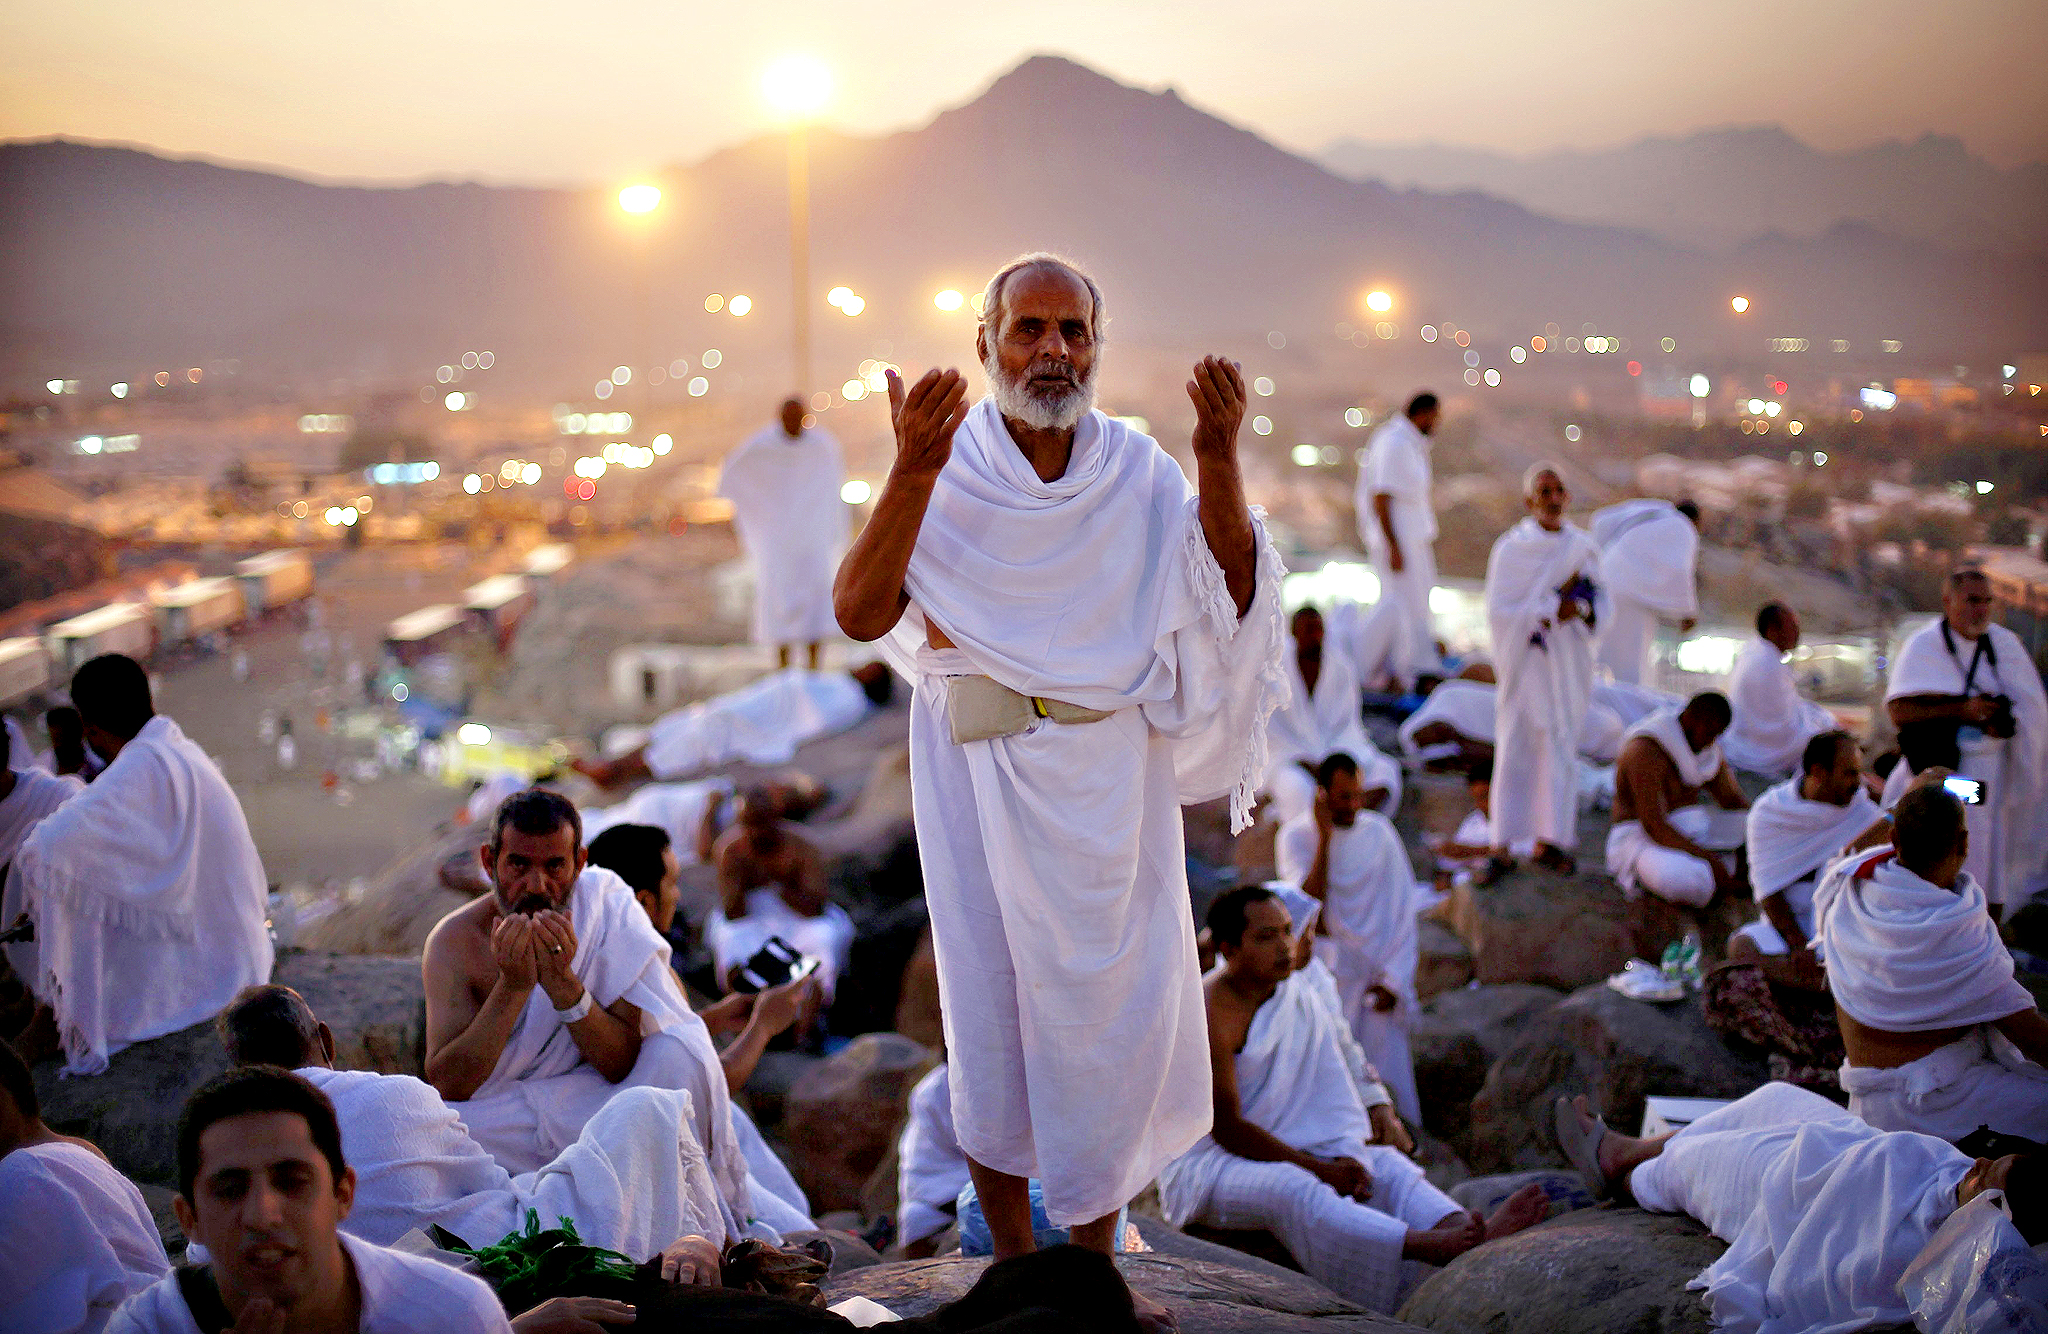 A Muslim pilgrim prays atop Mount Mercy on the plains of Arafat during the peak of the annual haj pilgrimage, near the holy city of Mecca...A Muslim pilgrim prays atop Mount Mercy on the plains of Arafat during the peak of the annual haj pilgrimage, near the holy city of Mecca early morning October 14, 2013. An estimated two million Muslims were in Mecca, Saudi Arabia, on Monday morning for the start of the annual Haj pilgrimage. REUTERS/Ibraheem Abu Mustafa (SAUDI ARABIA - Tags: SOCIETY RELIGION)